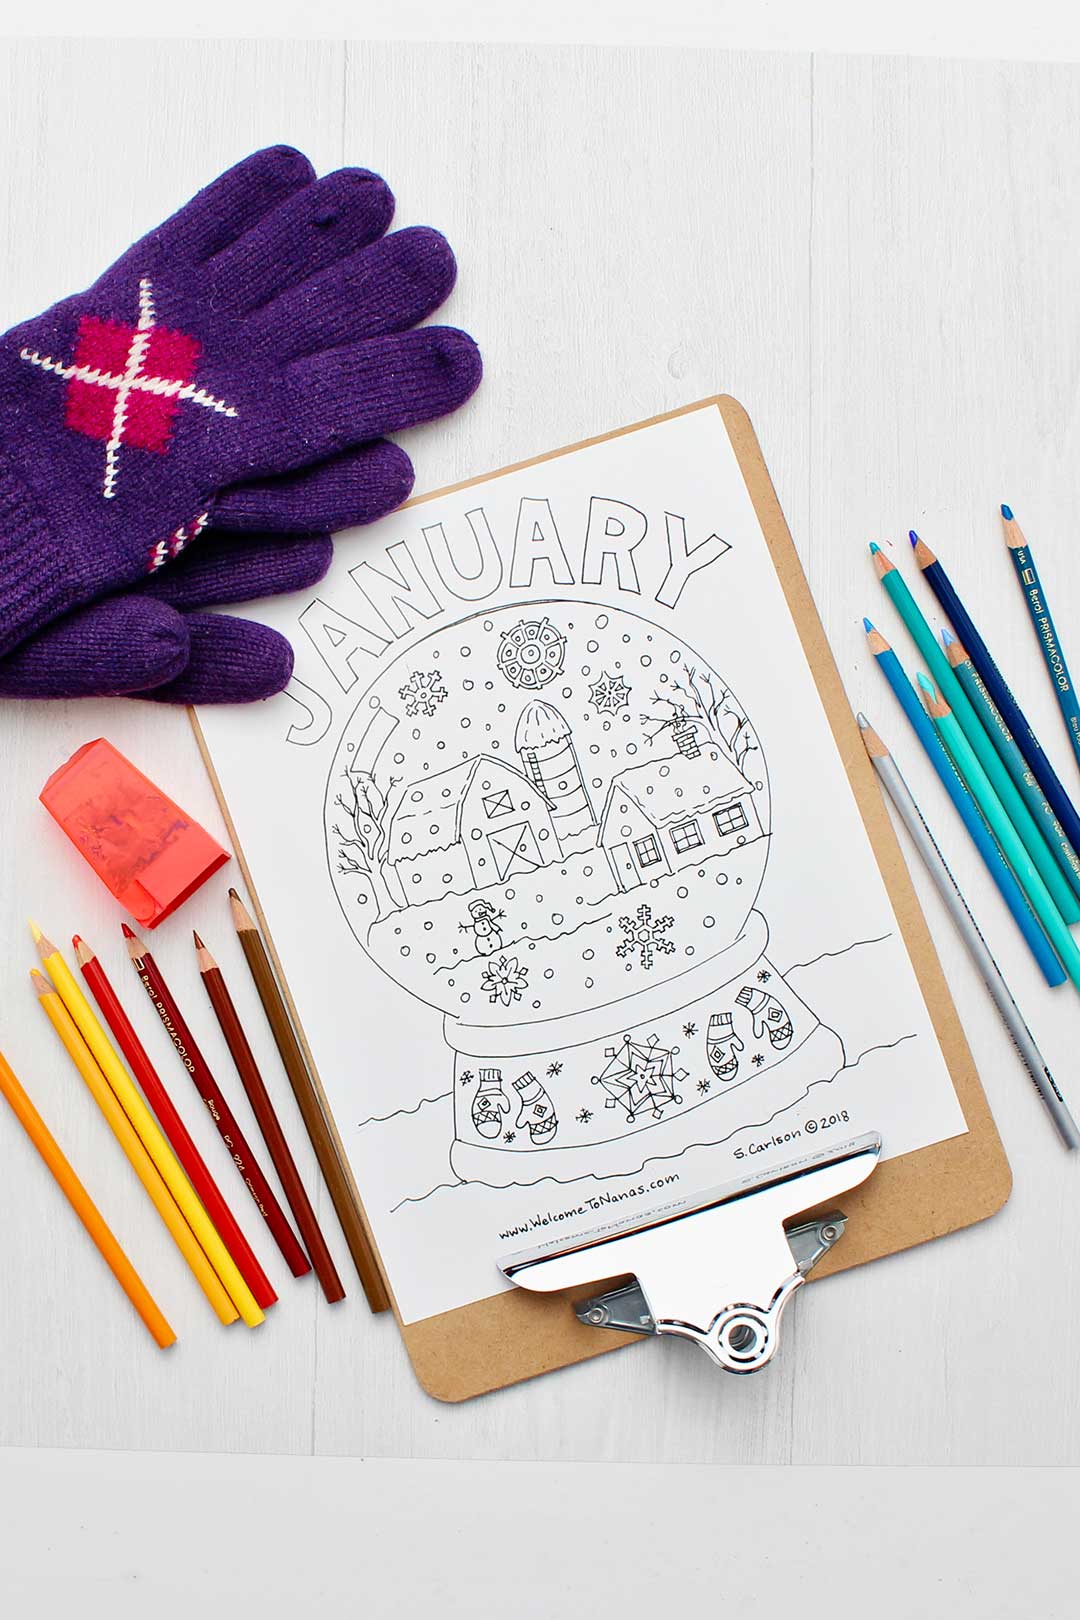 Uncolored January coloring page on clipboard surrounded by colored pencils and purple gloves.